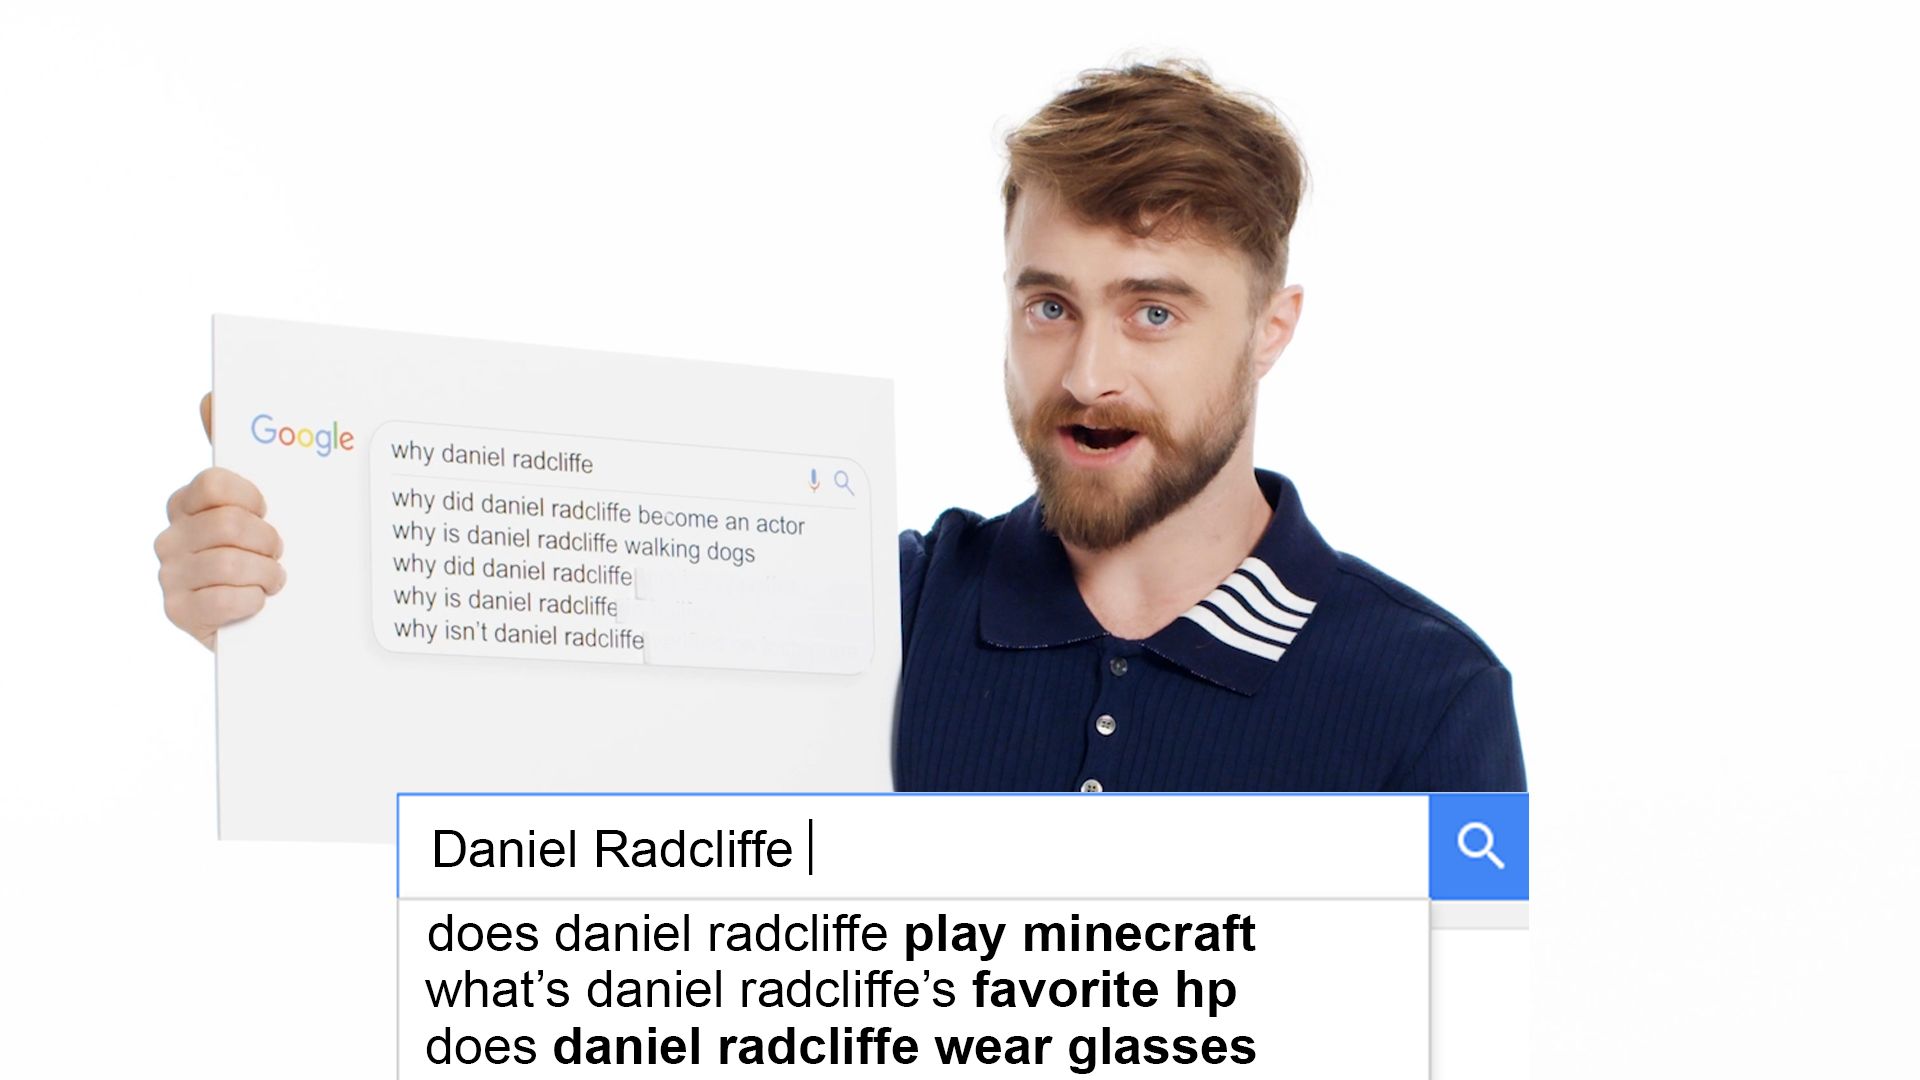 Daniel Radcliffe Fun Facts and Things You Didn't Know